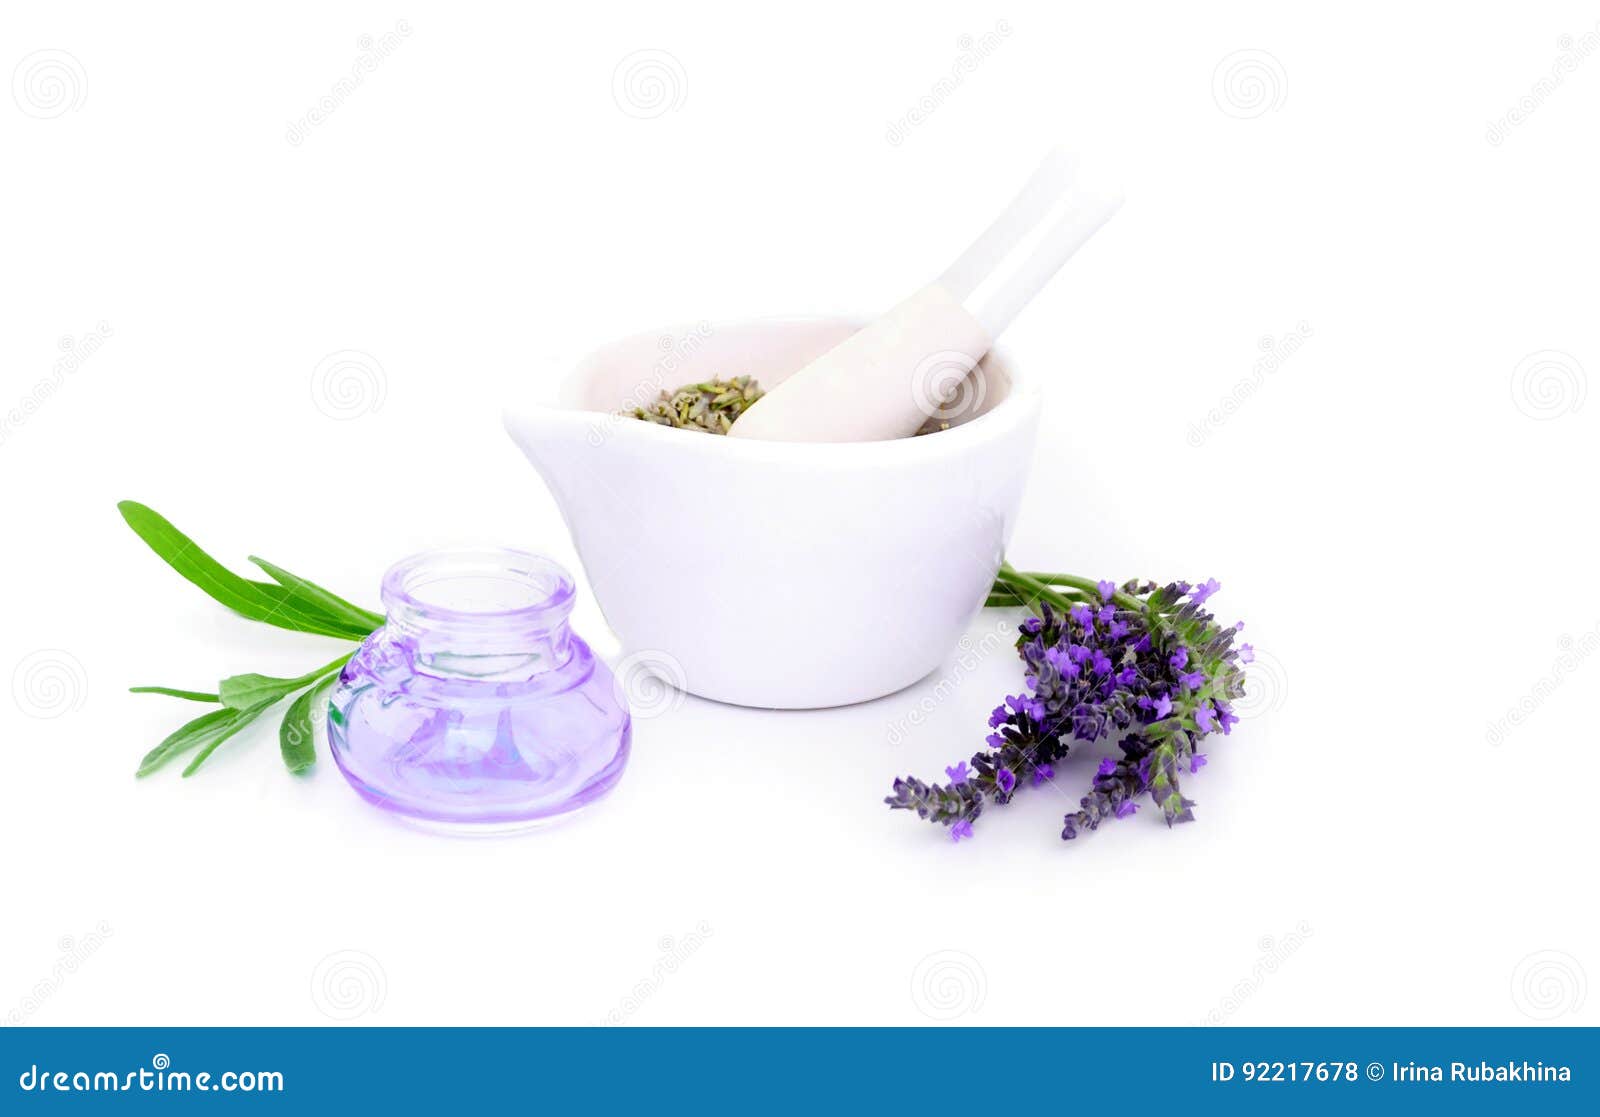 lavender flowers, lavander extract and montar with dry flowers  on white